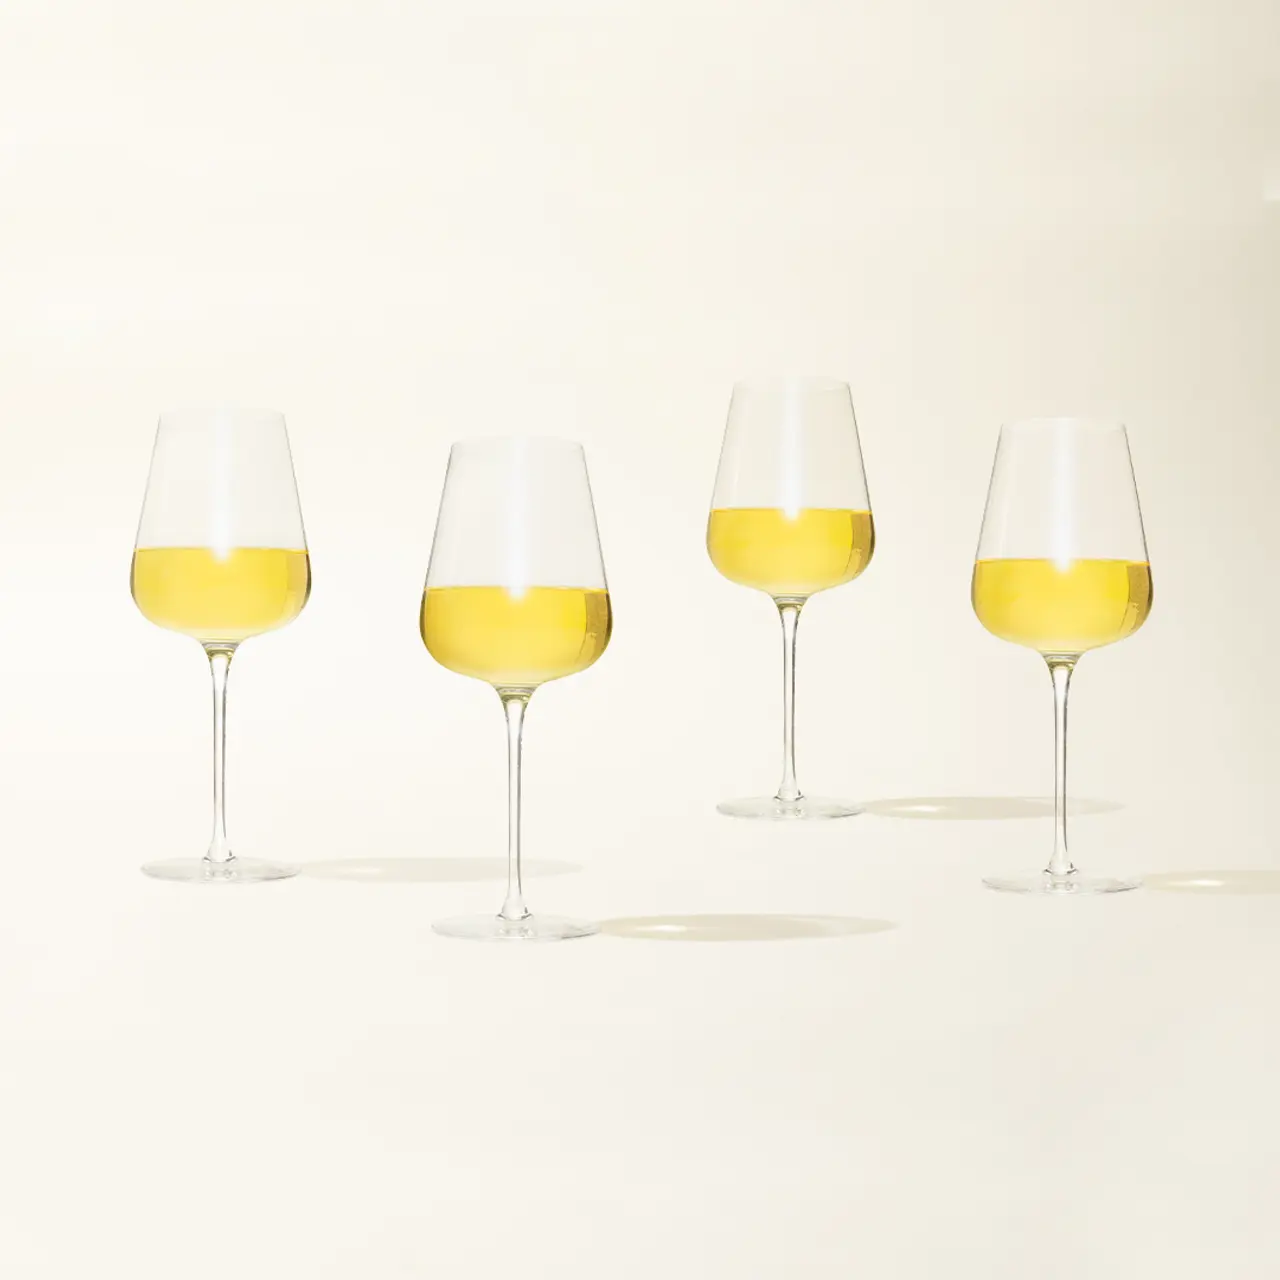 Four wine glasses filled with white wine are lined up against a light background.